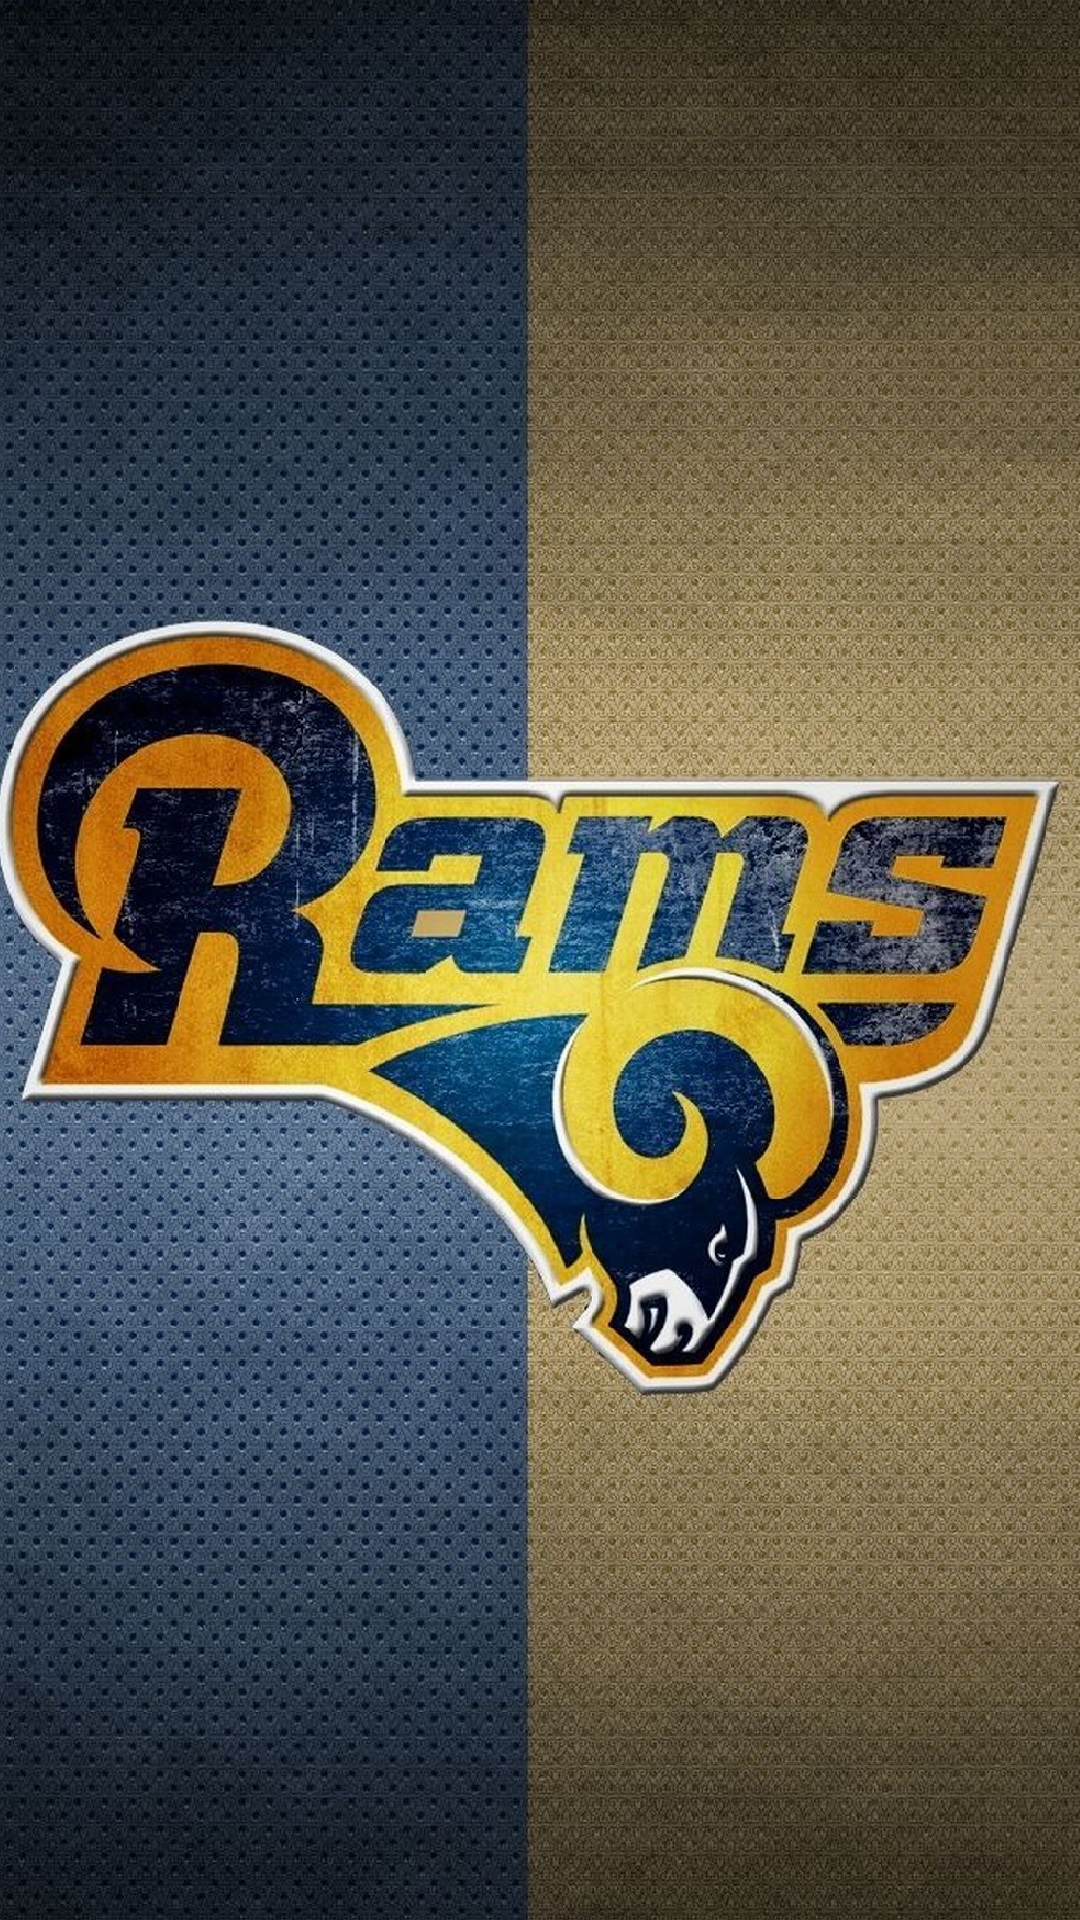 Los Angeles Rams iPhone Wallpaper Home Screen with high-resolution 1080x1920 pixel. Download and set as wallpaper for Desktop Computer, Apple iPhone X, XS Max, XR, 8, 7, 6, SE, iPad, Android